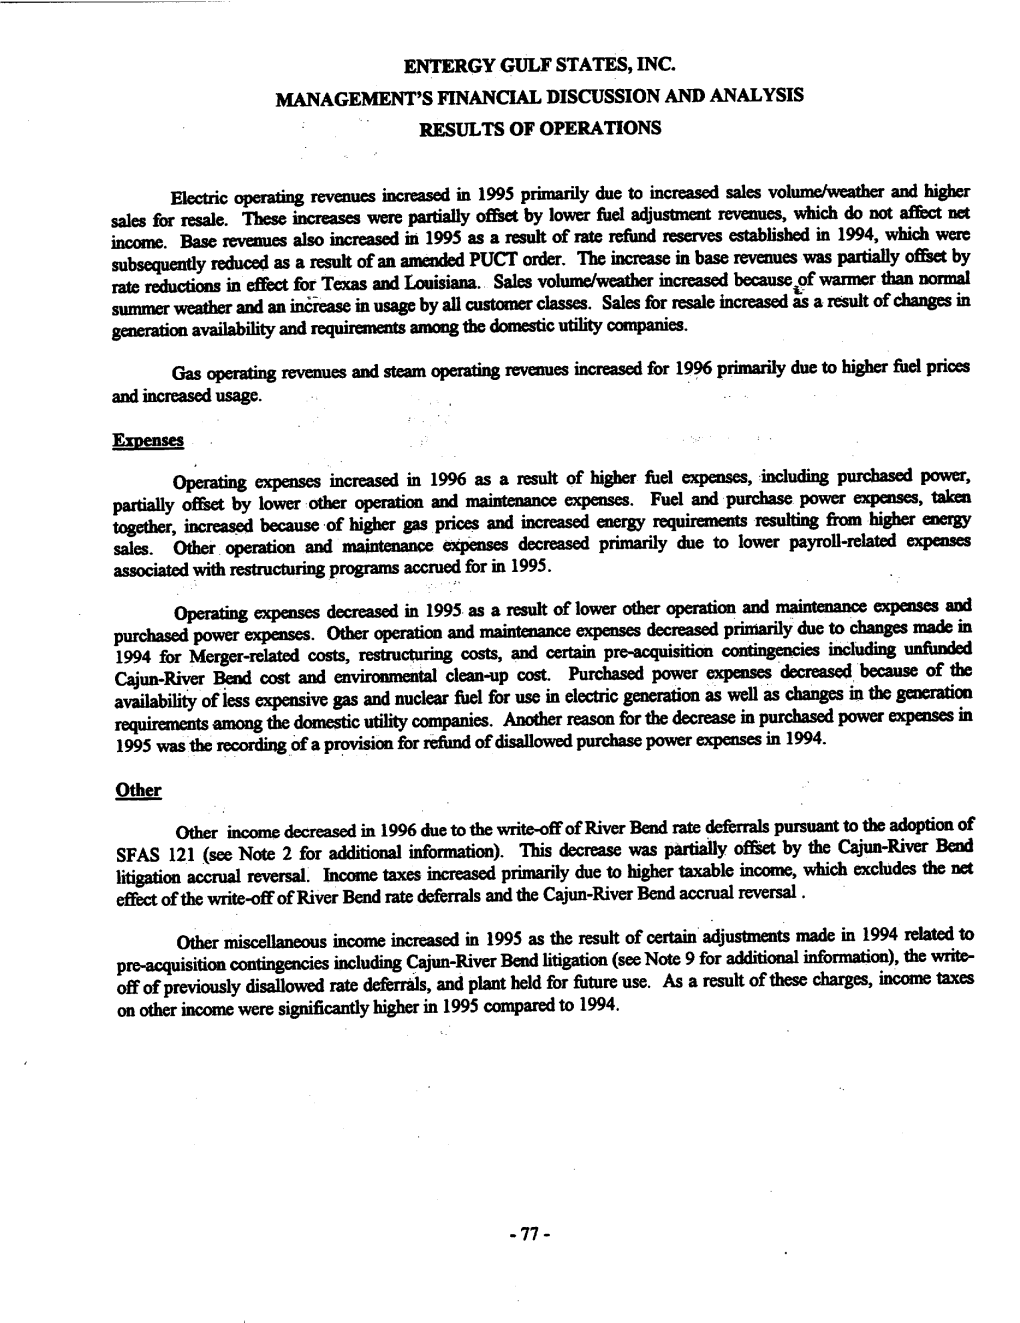 Vermont Yankee Nuclear Power Corp, Transfer of Facility Operating License and Proposed License Amendments. Entergy Gulf